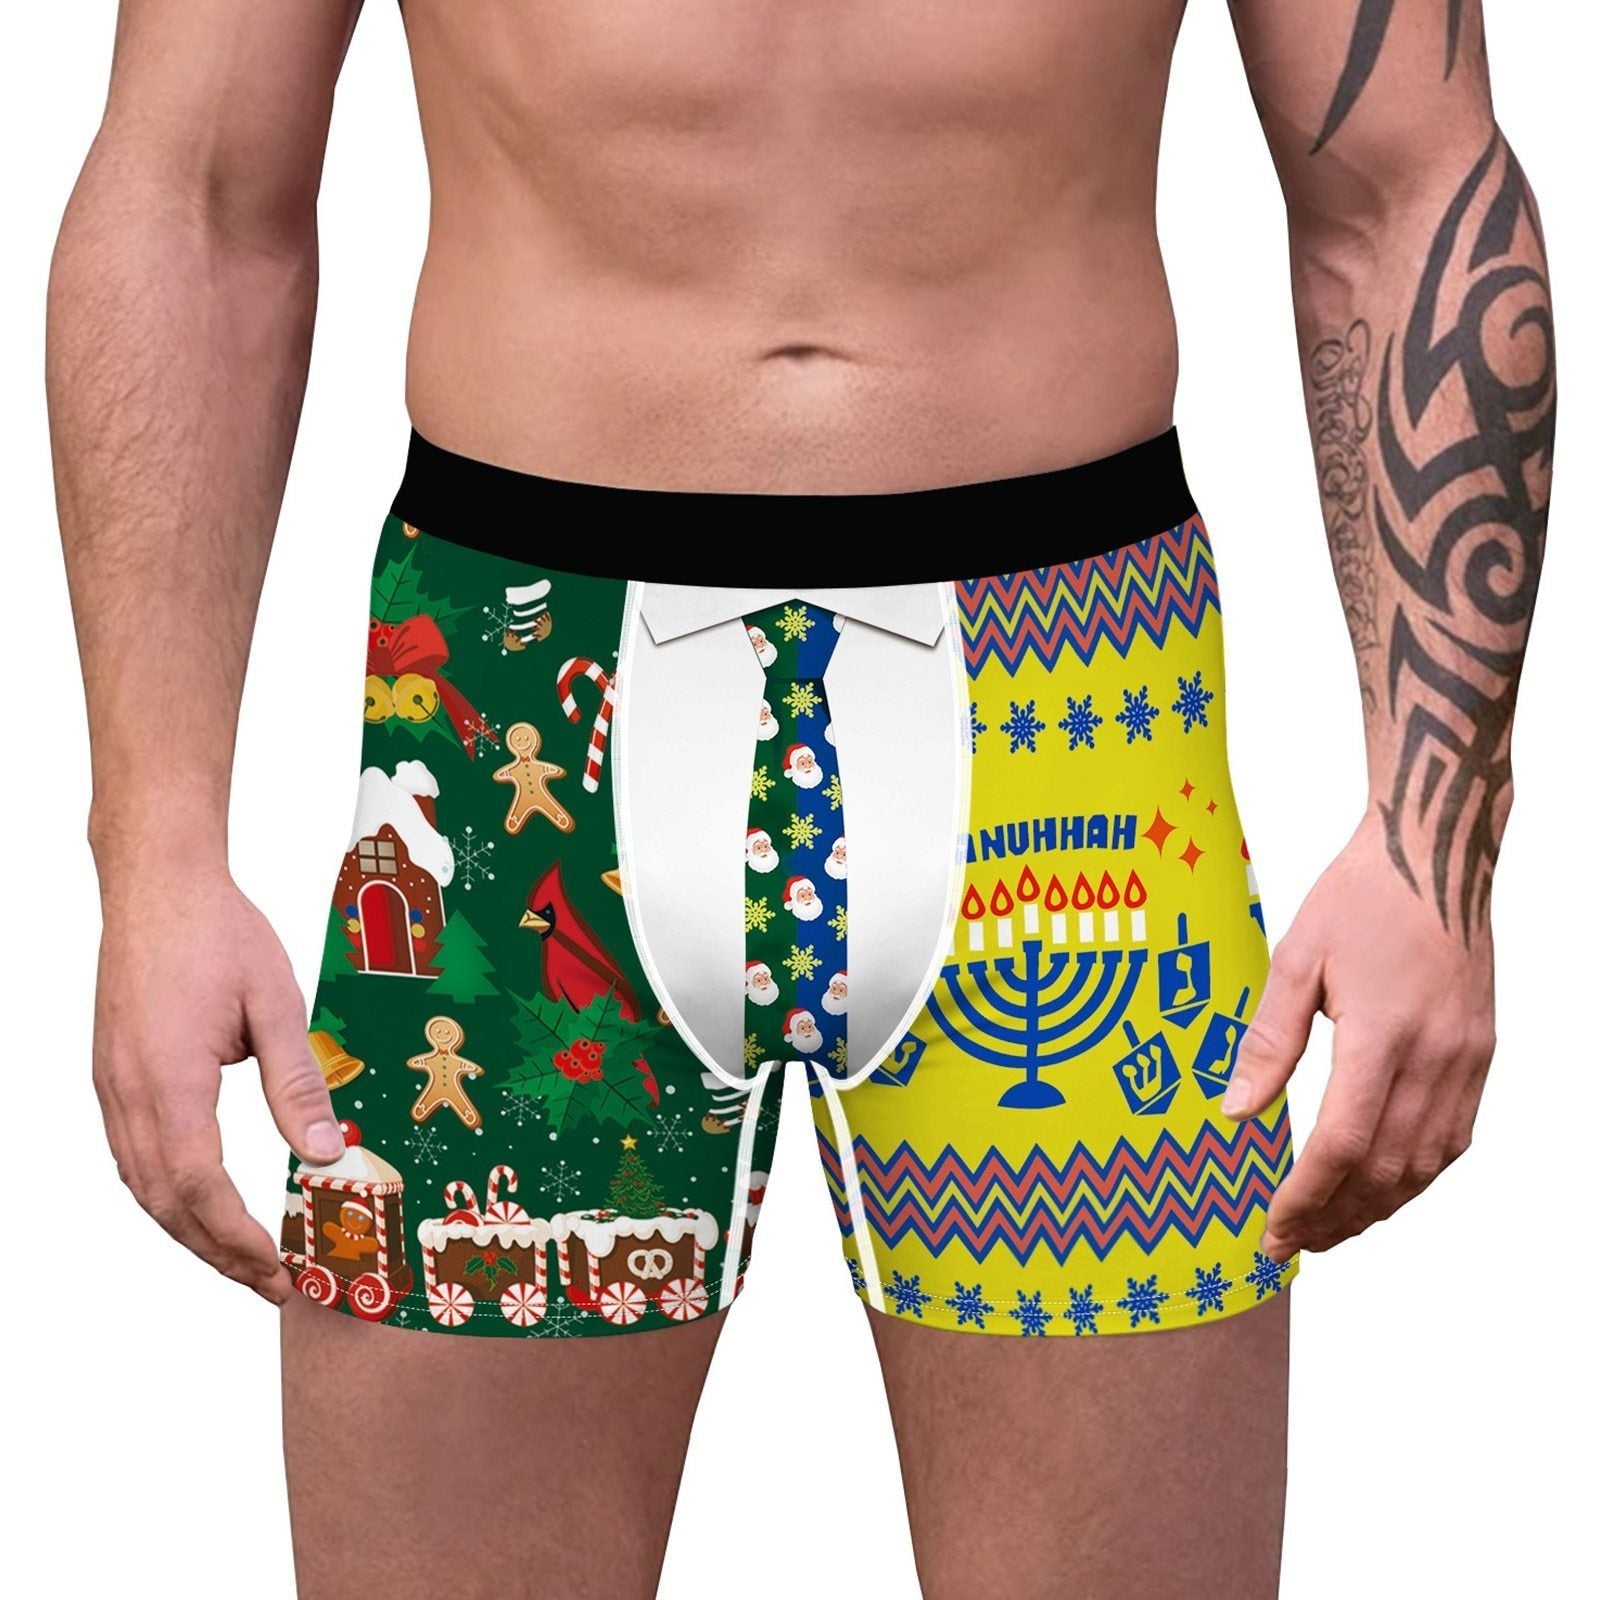 SALE - XMAS GIFT - Mens Christmas Boxer Shorts Printed Holiday Season with Tie Pouch Front